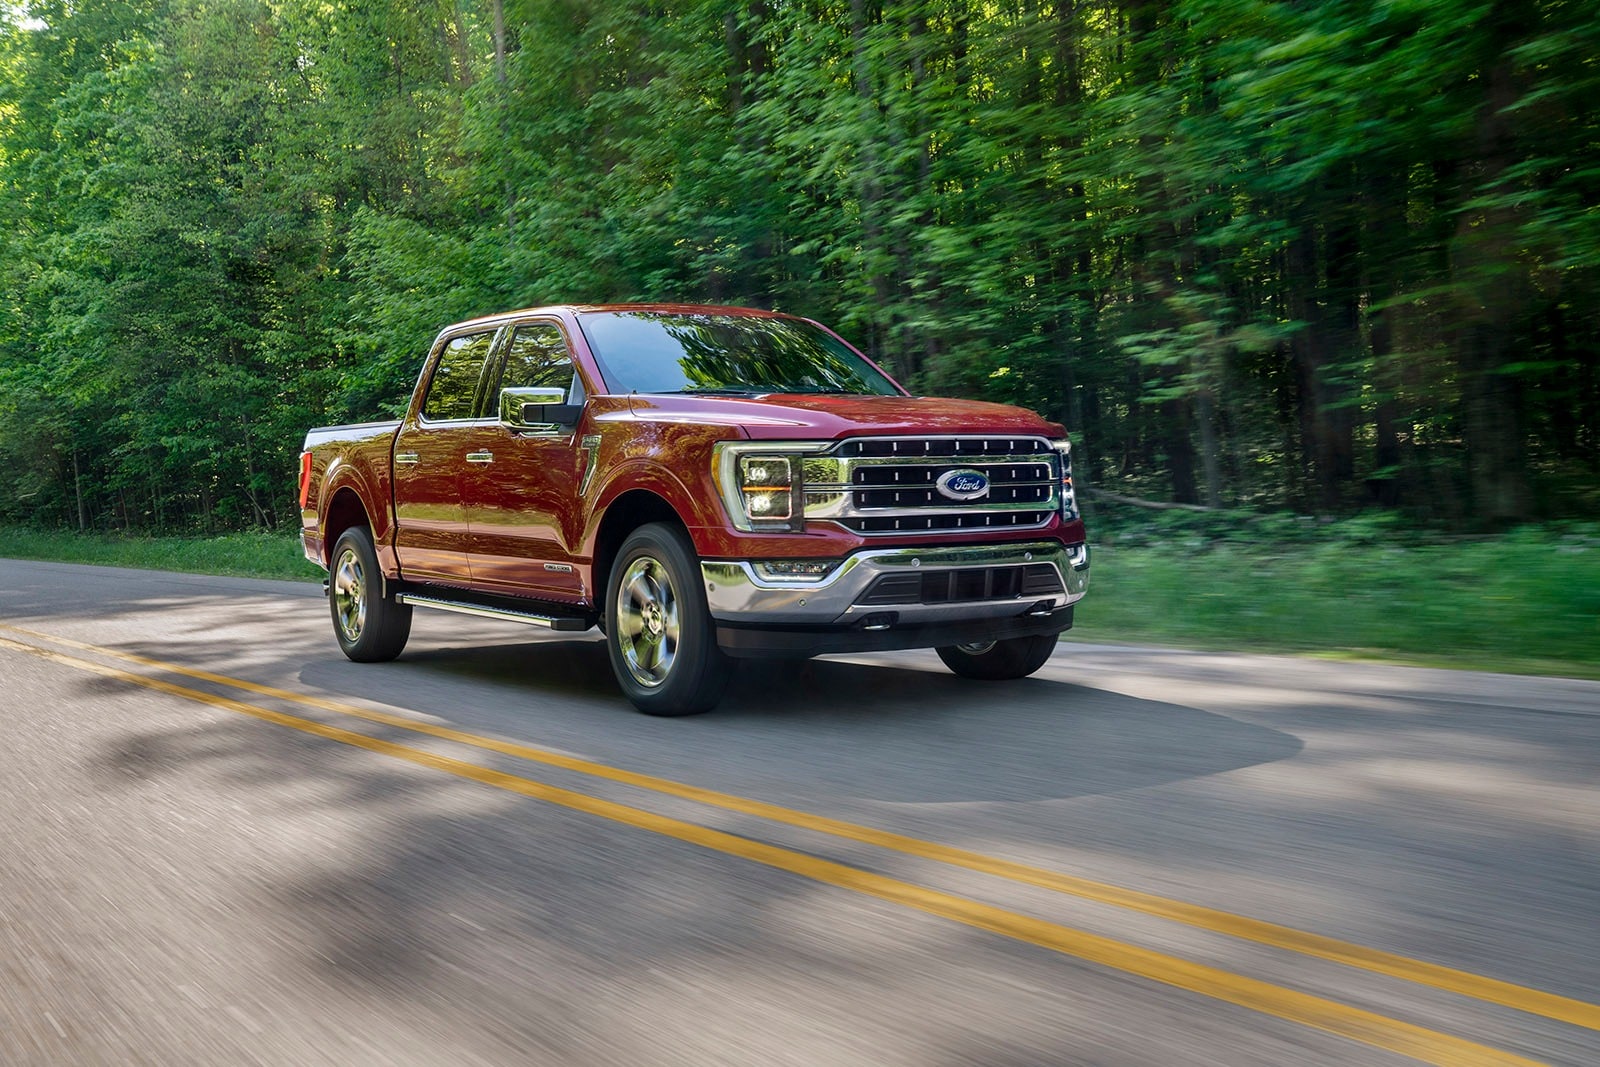 Electric Boogie: Driving the Redesigned 2021 Ford F-150 With Its New Hybrid Powertrain